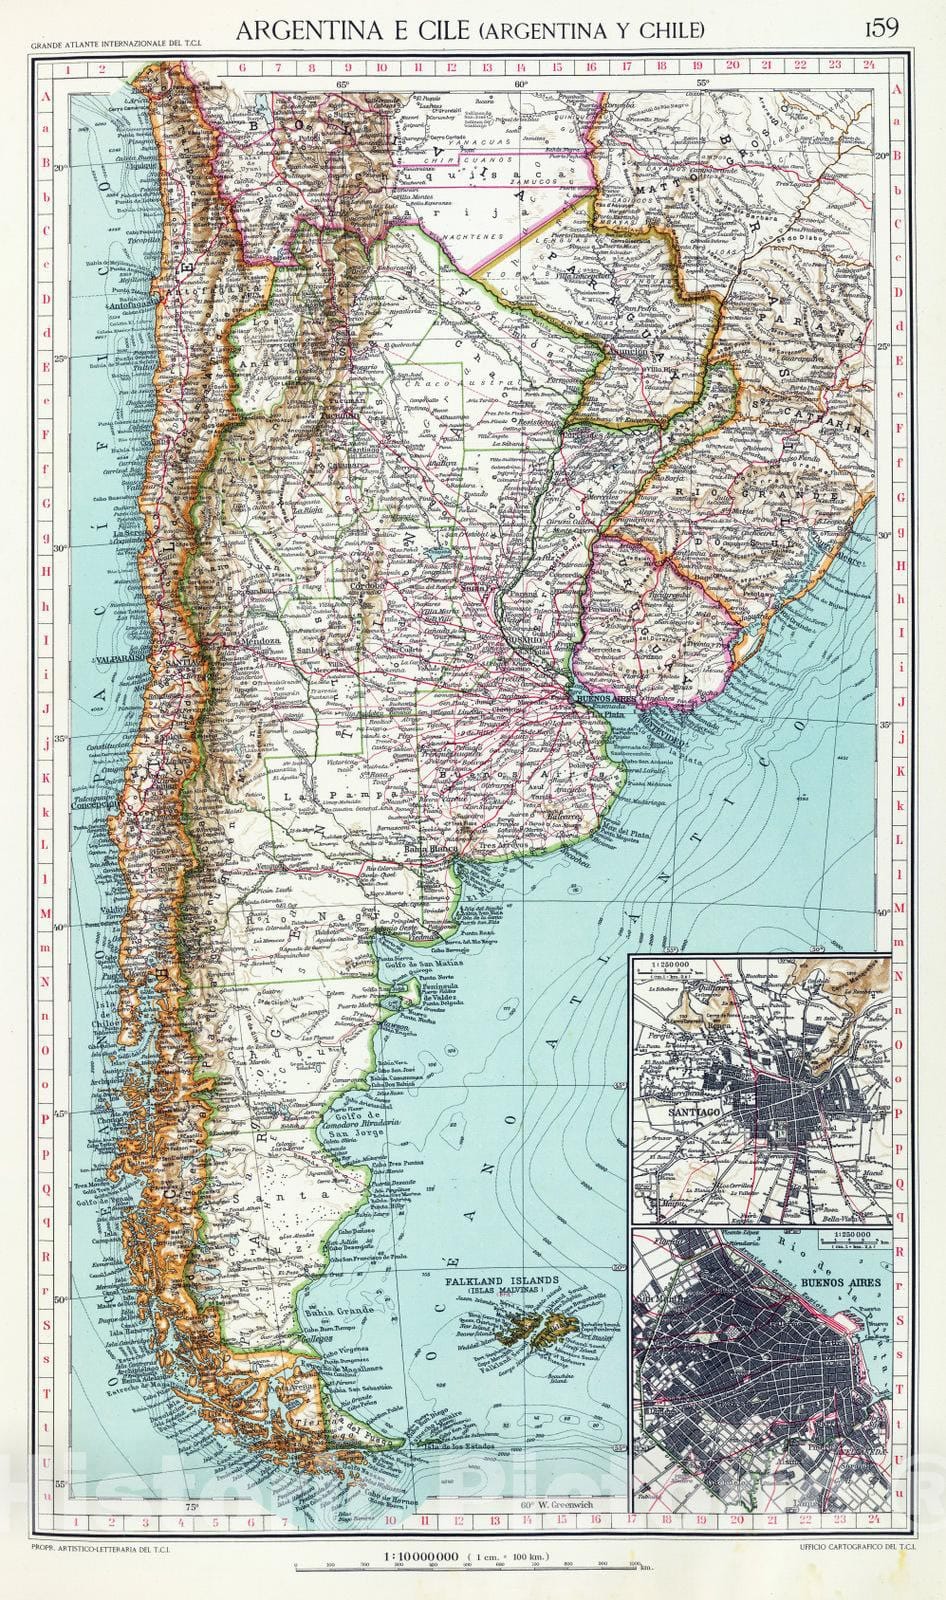 Historic Map : Argentina; Chile, Buenos Aires Region (Argentina) 1929 -  Historic Pictoric